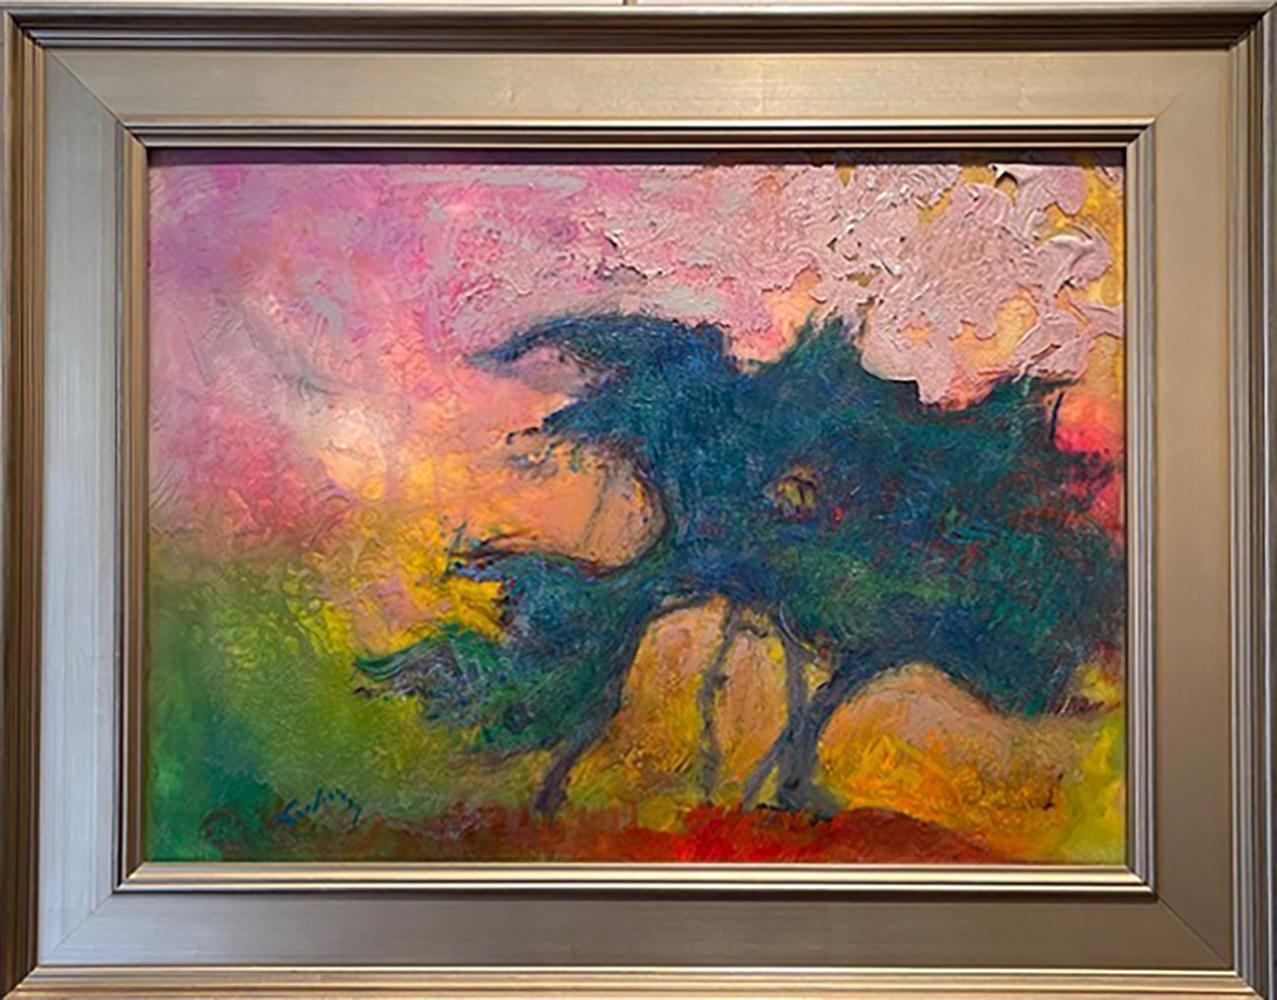 Tree of Life, Contemporary Expressionist Landscape - Painting by Al Lachman 